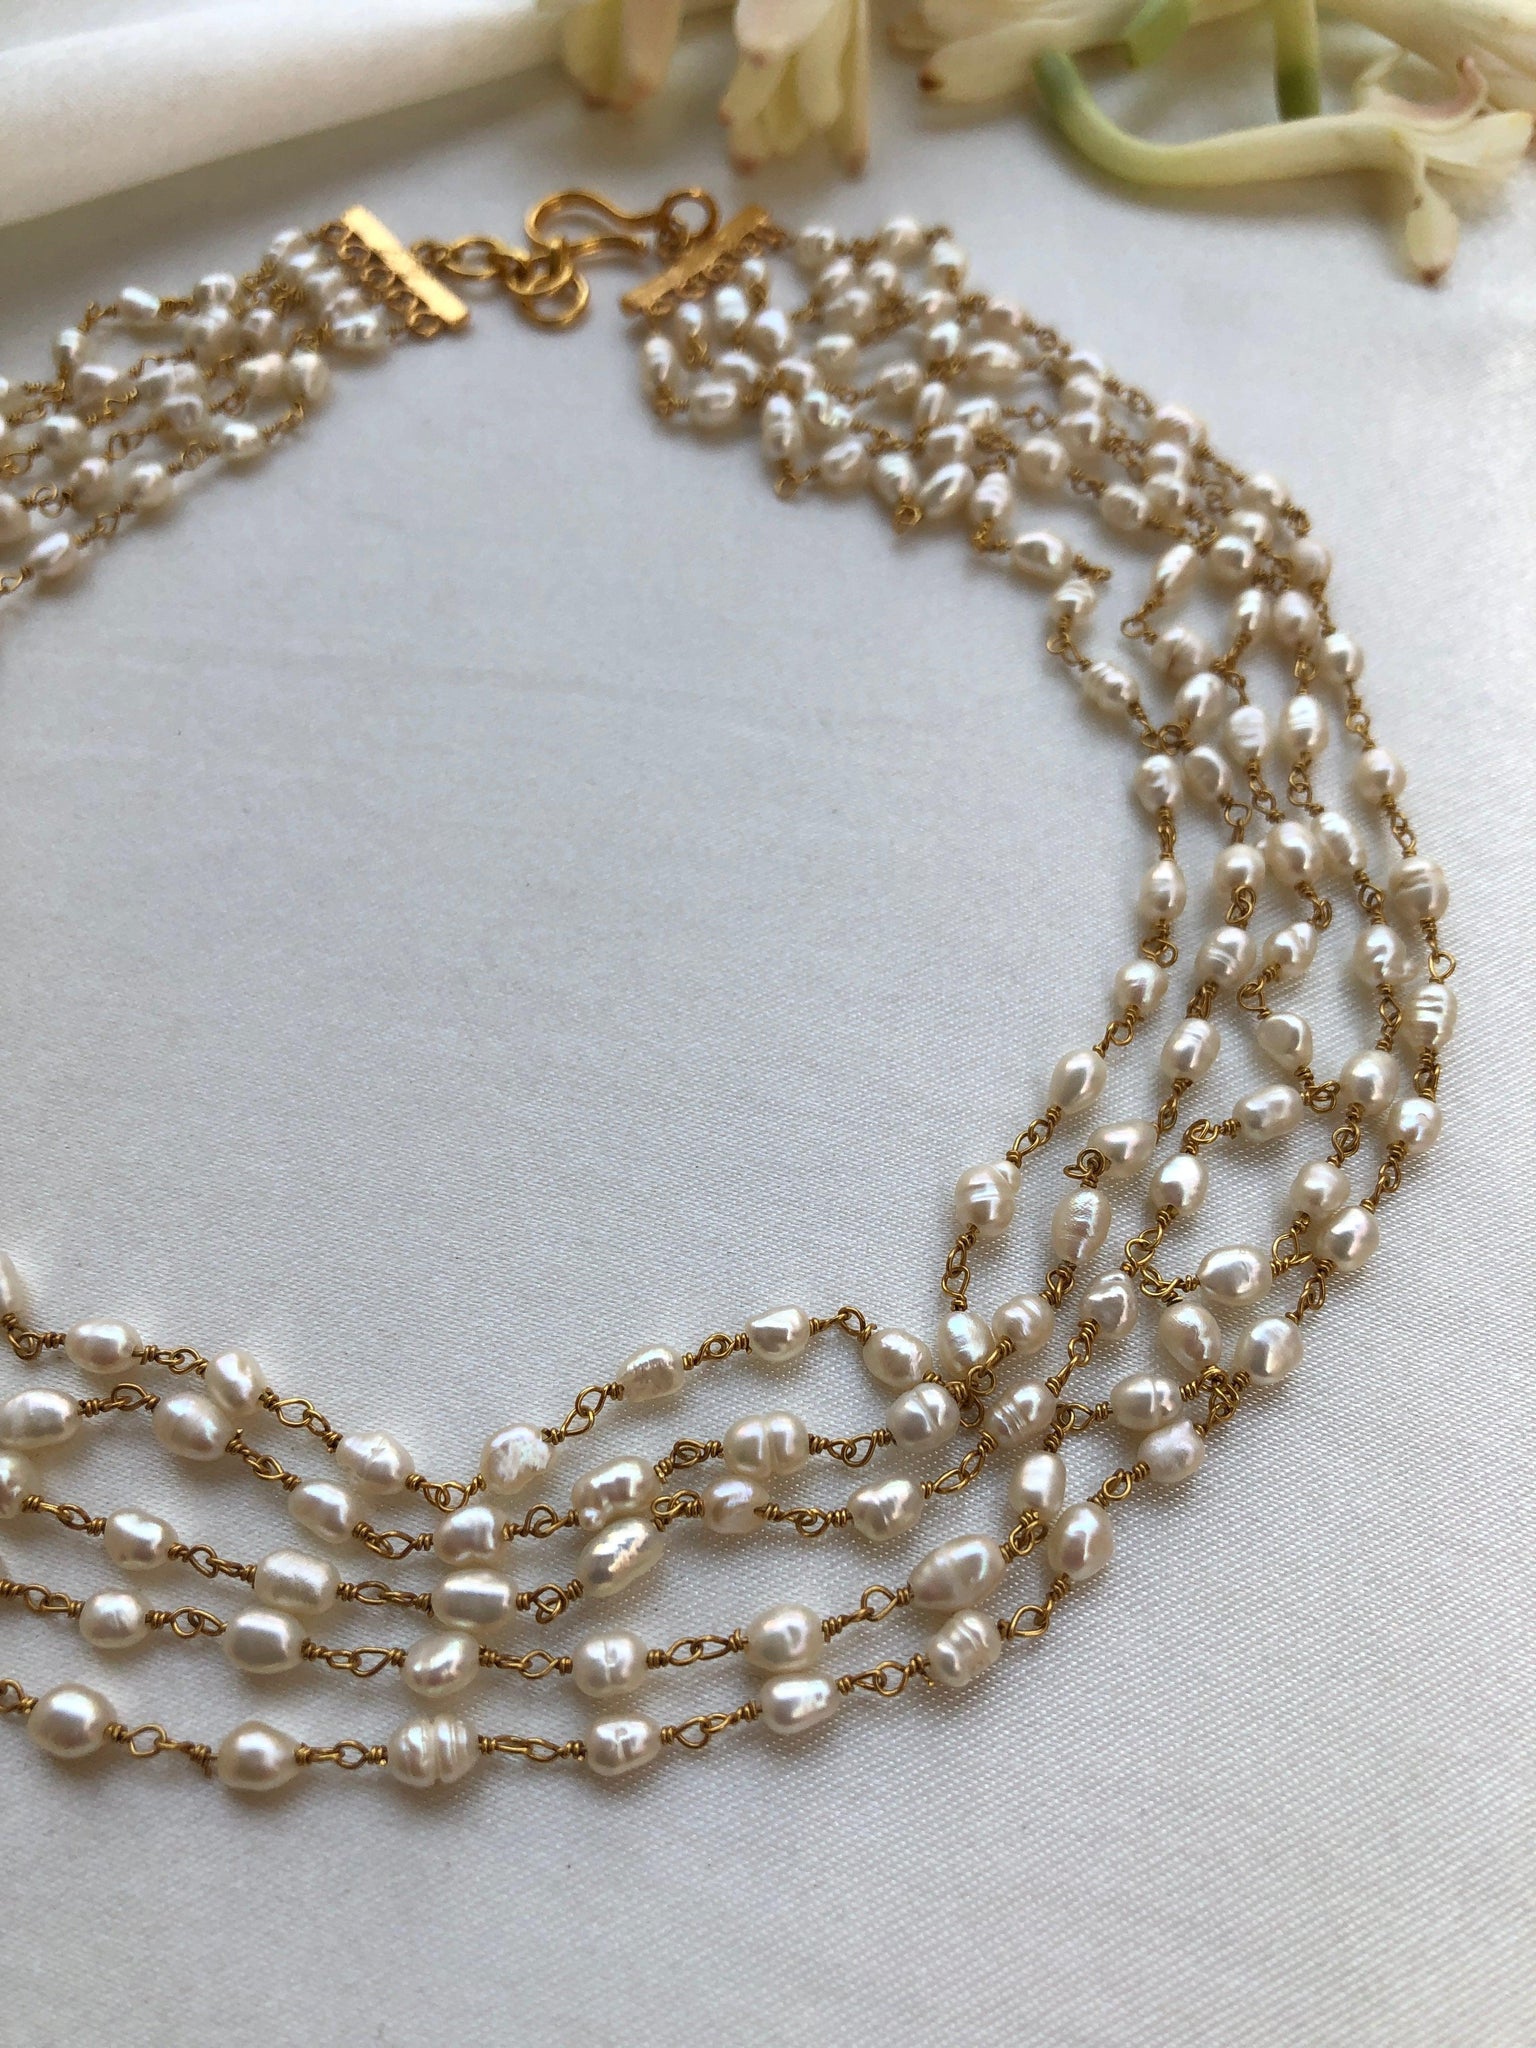 Necklaces & Chains | Pearl Necklace Chain | Freeup